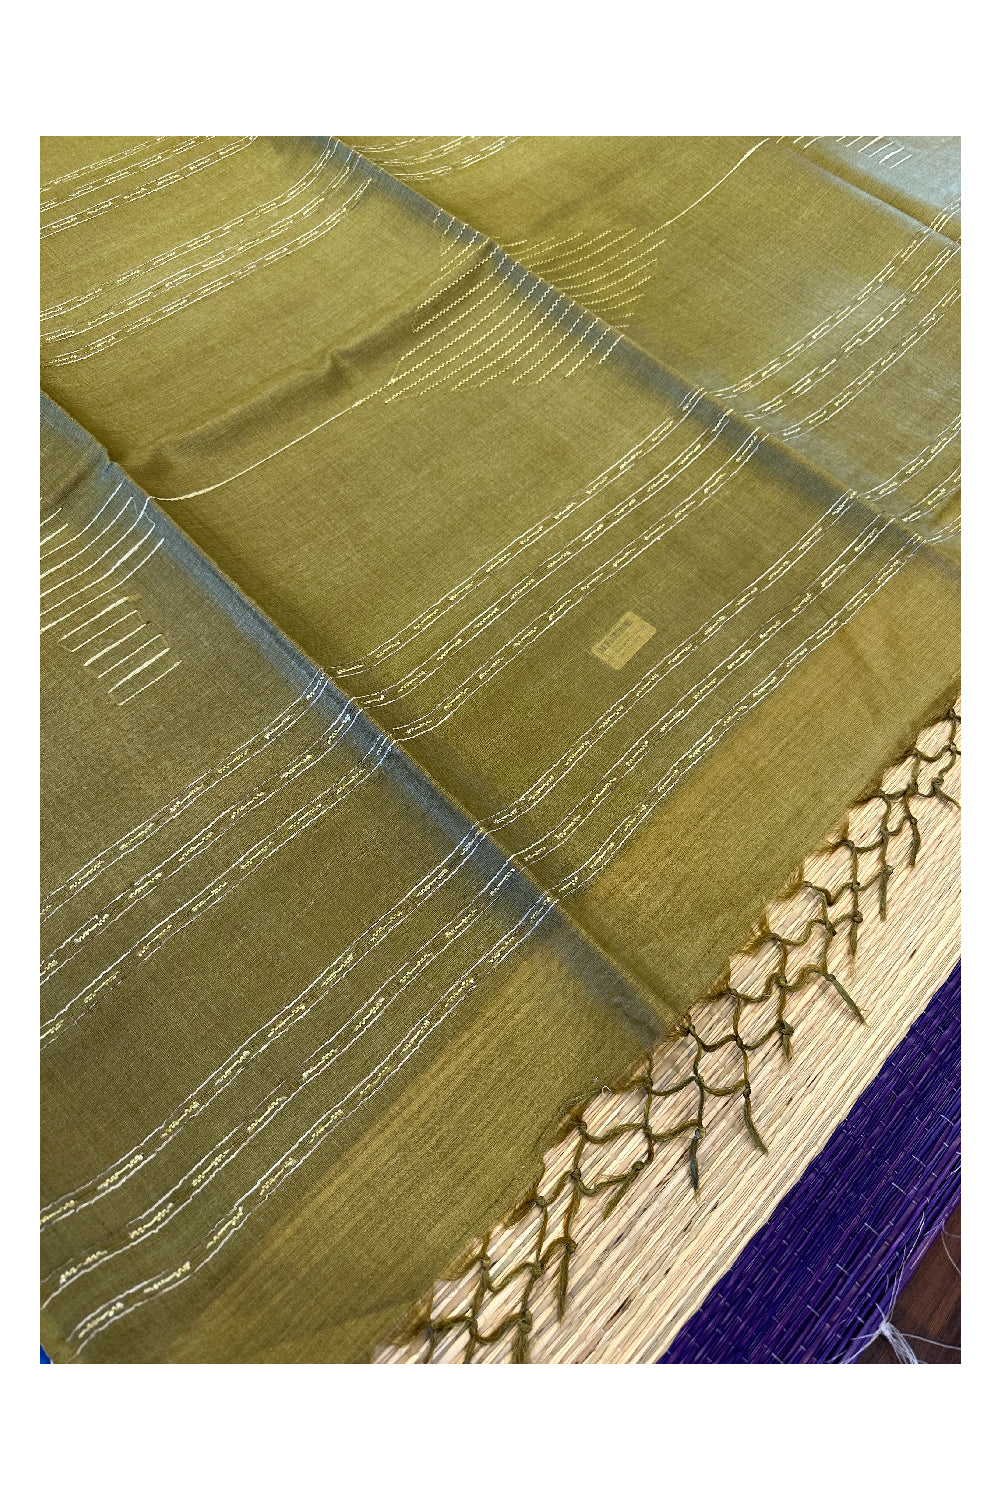 Southloom Pure Tussar Saree with Plain Body and Blouse Piece in Green